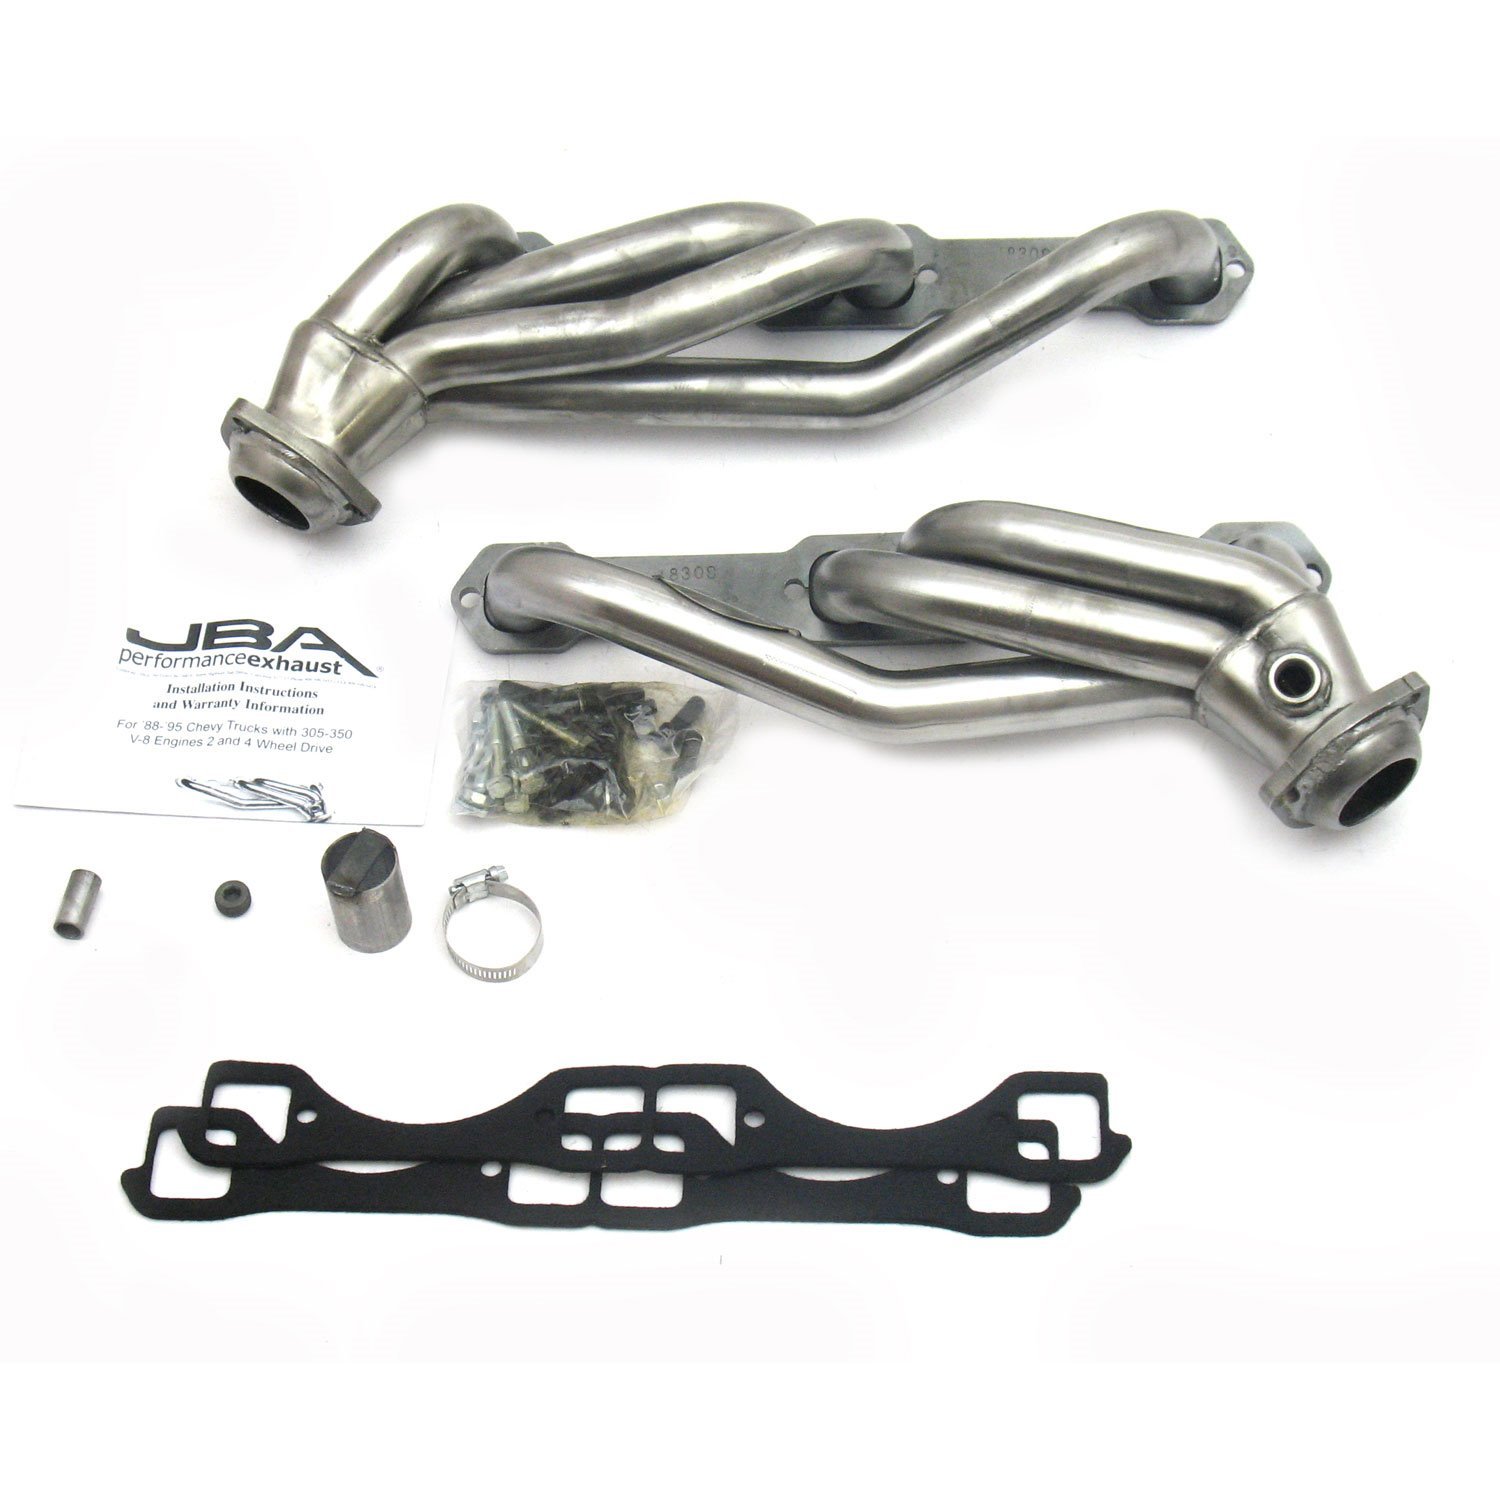 1832S Shorty Headers for 1988-1995 GM Trucks, SUVs w/5.0L & 5.7L Engines [w/Air Injection]